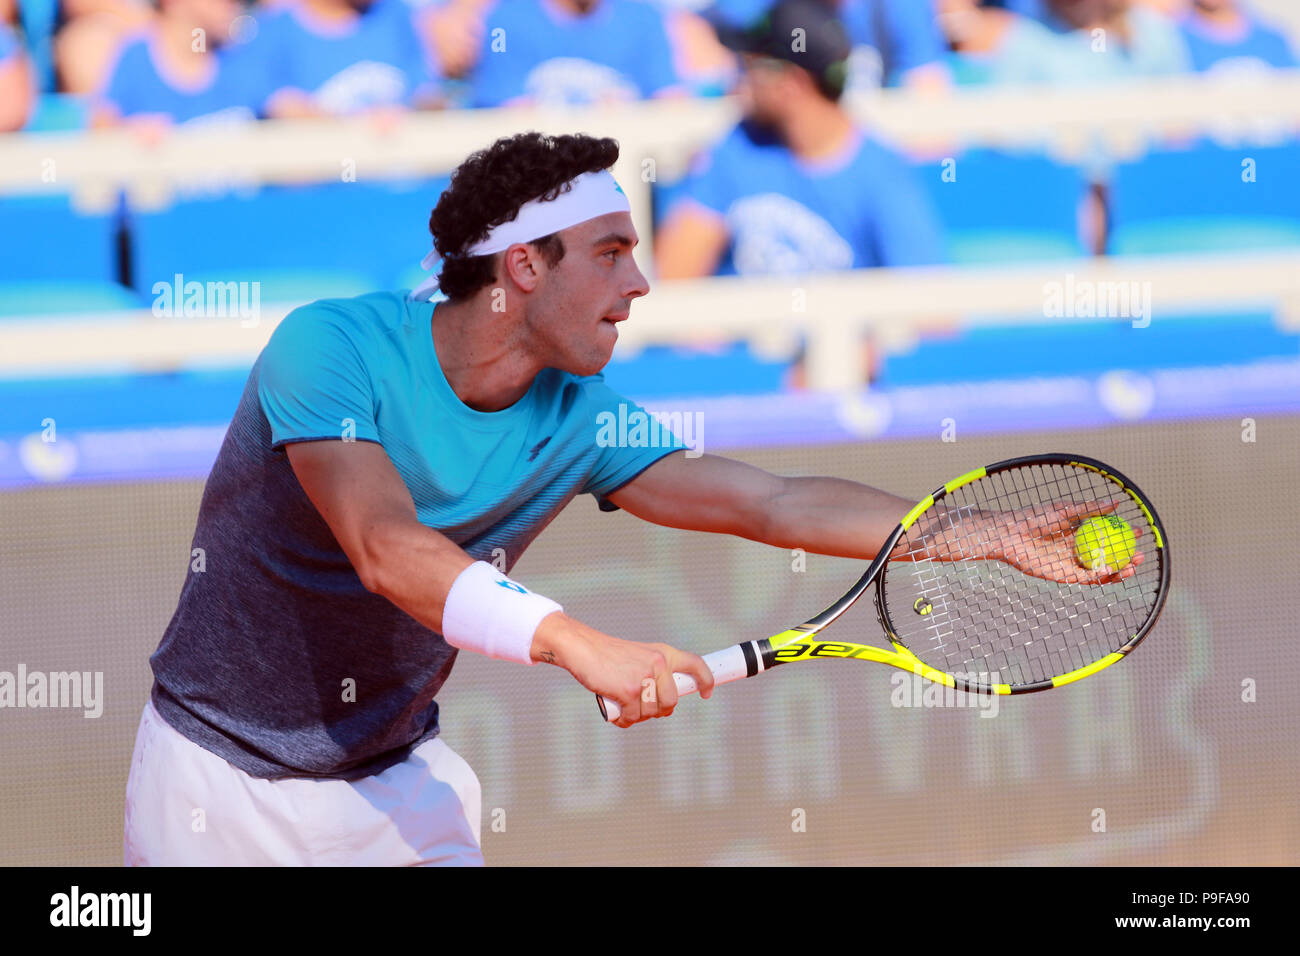 Umag, Croatia. 18th July 2018. CROATIA, Umag: Marco Cecchinato of Italy prepares to serve against Jiri Vesely during the singles match Vesely v Cecchinato at the ATP 29th Plava laguna Croatia Open Umag tournament at the at the Goran Ivanisevic ATP Stadium, on July 18, 2018 in Umag. Credit: Andrea Spinelli/Alamy Live News Stock Photo